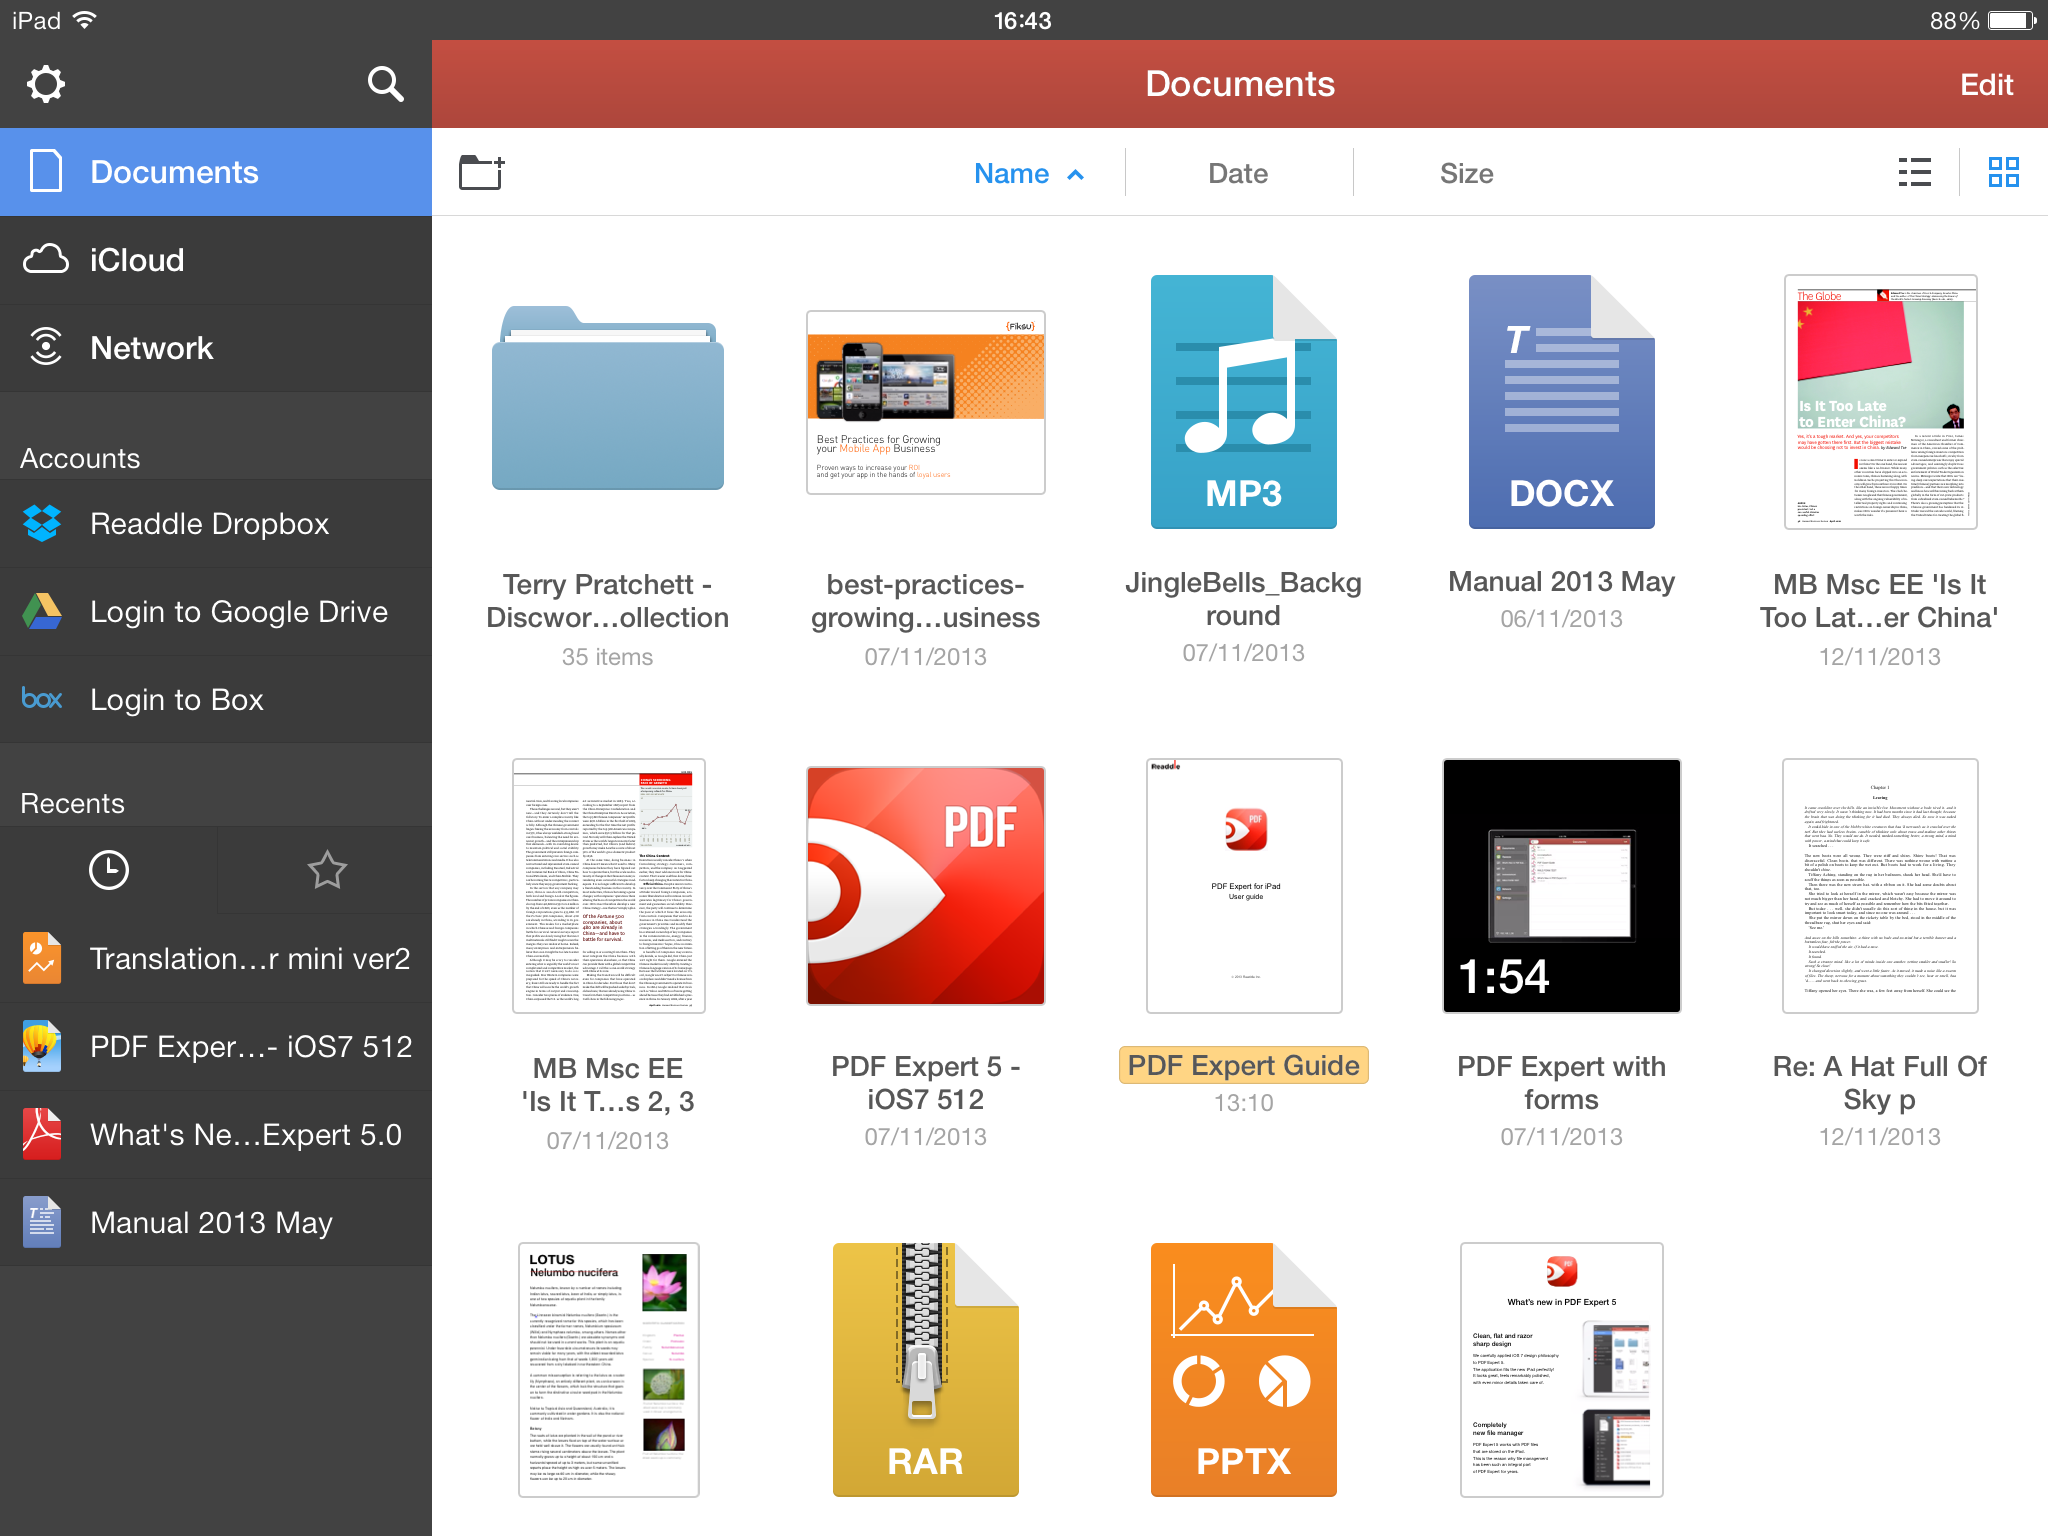 PDF management iPad app PDF Expert redesigned, adds AirDrop, tags & file  sorting improvements - 9to5Mac